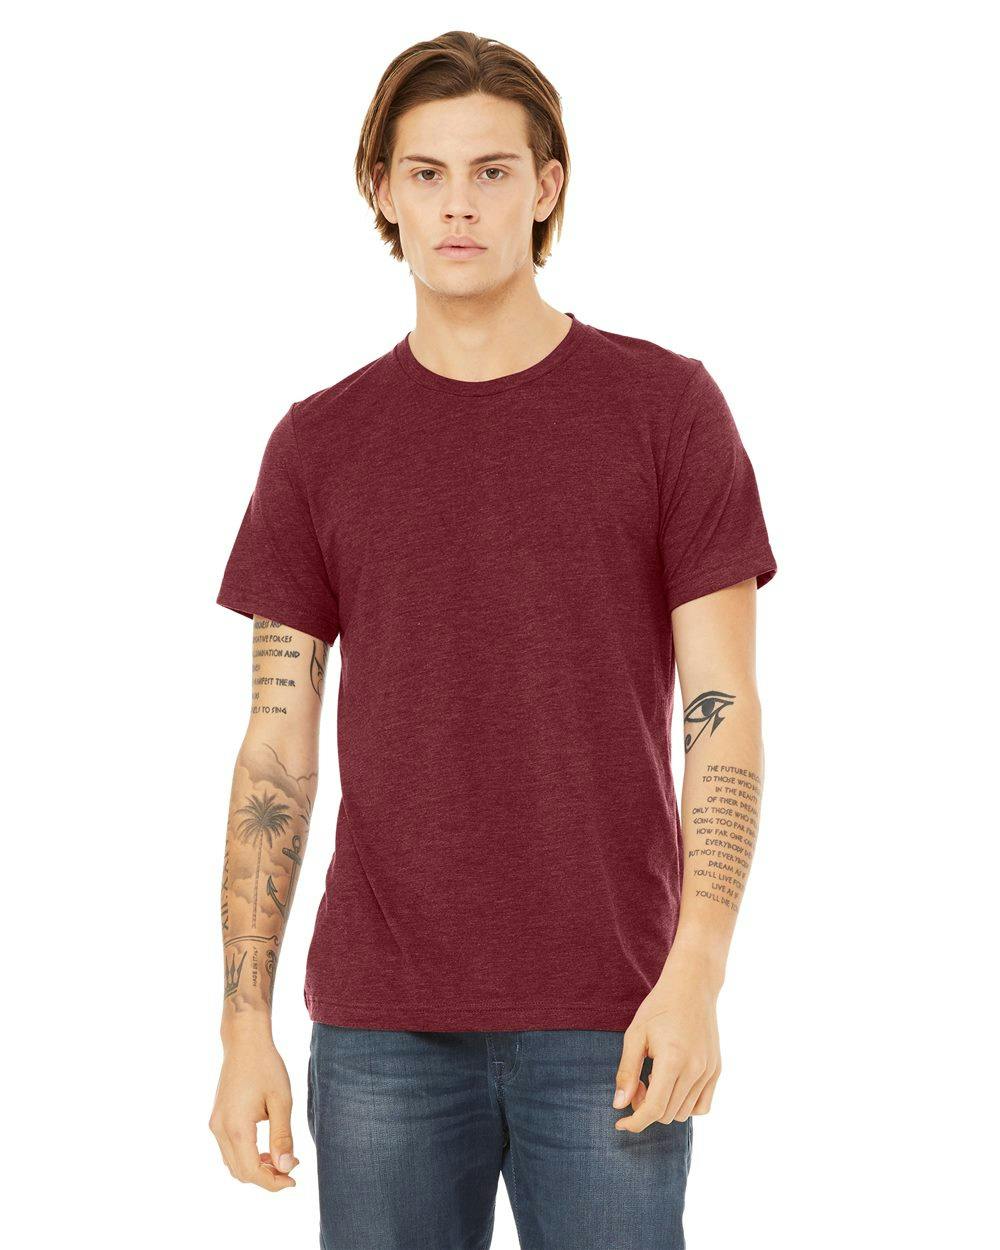 Image for Triblend Tee - 3413